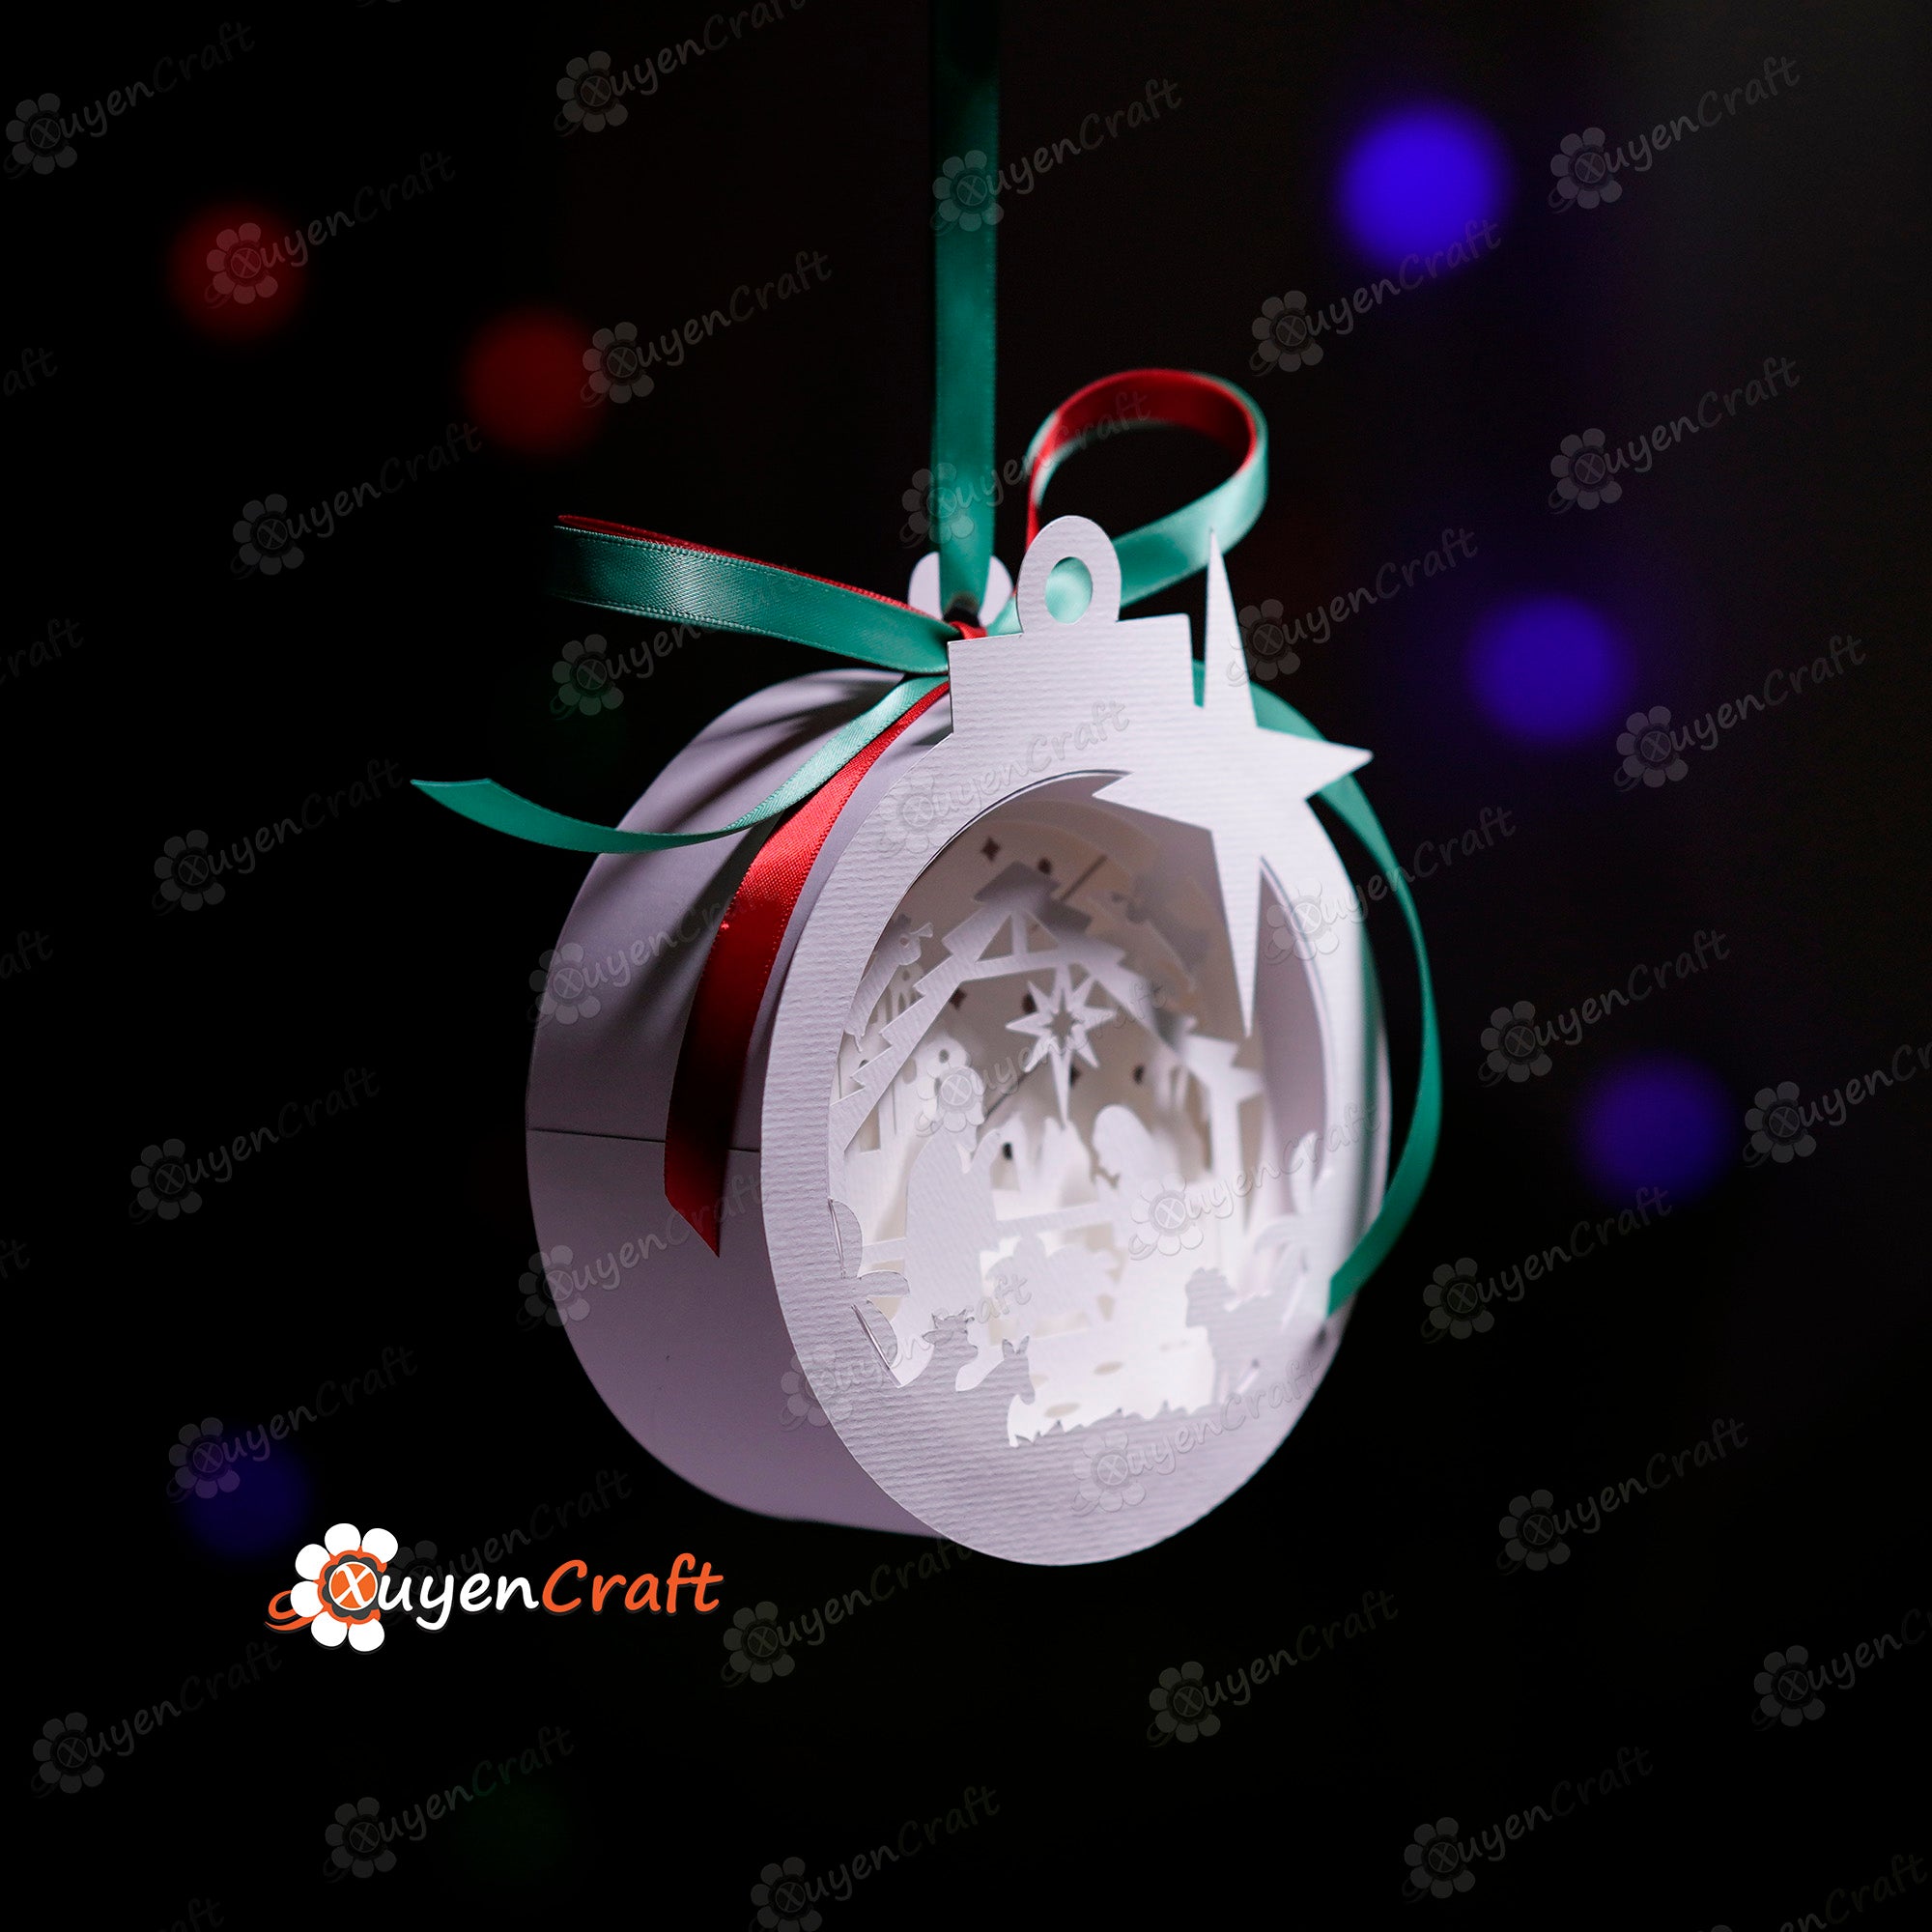 Pack 3 Nativity Scene Christmas Balls SVG for Creating Christmas Ball Ornaments Tree Decorations - DIY Christmas Lantern for Christmas Tree